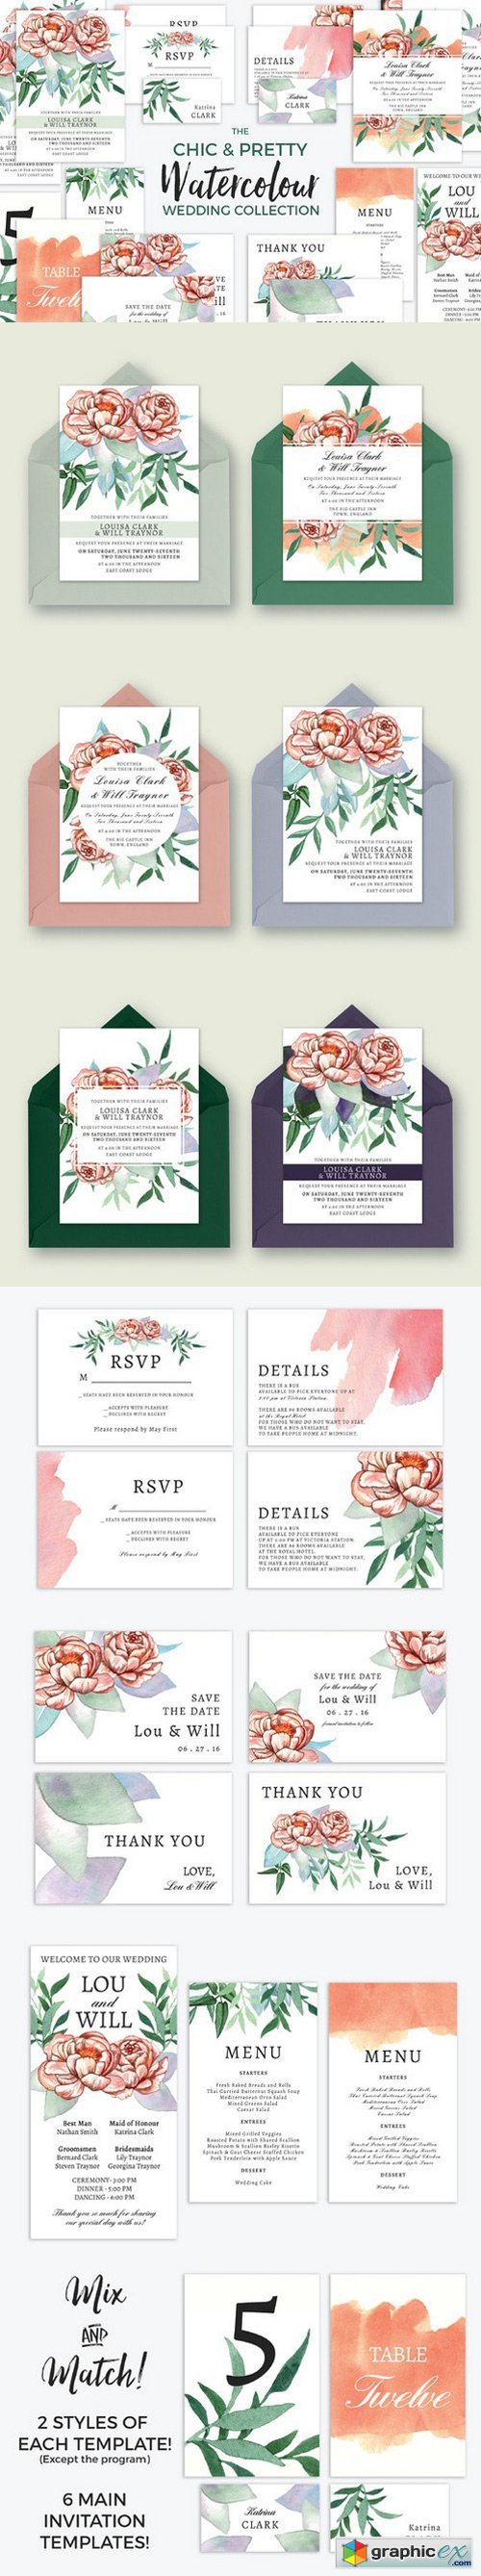 Chic Watercolour Wedding Collection